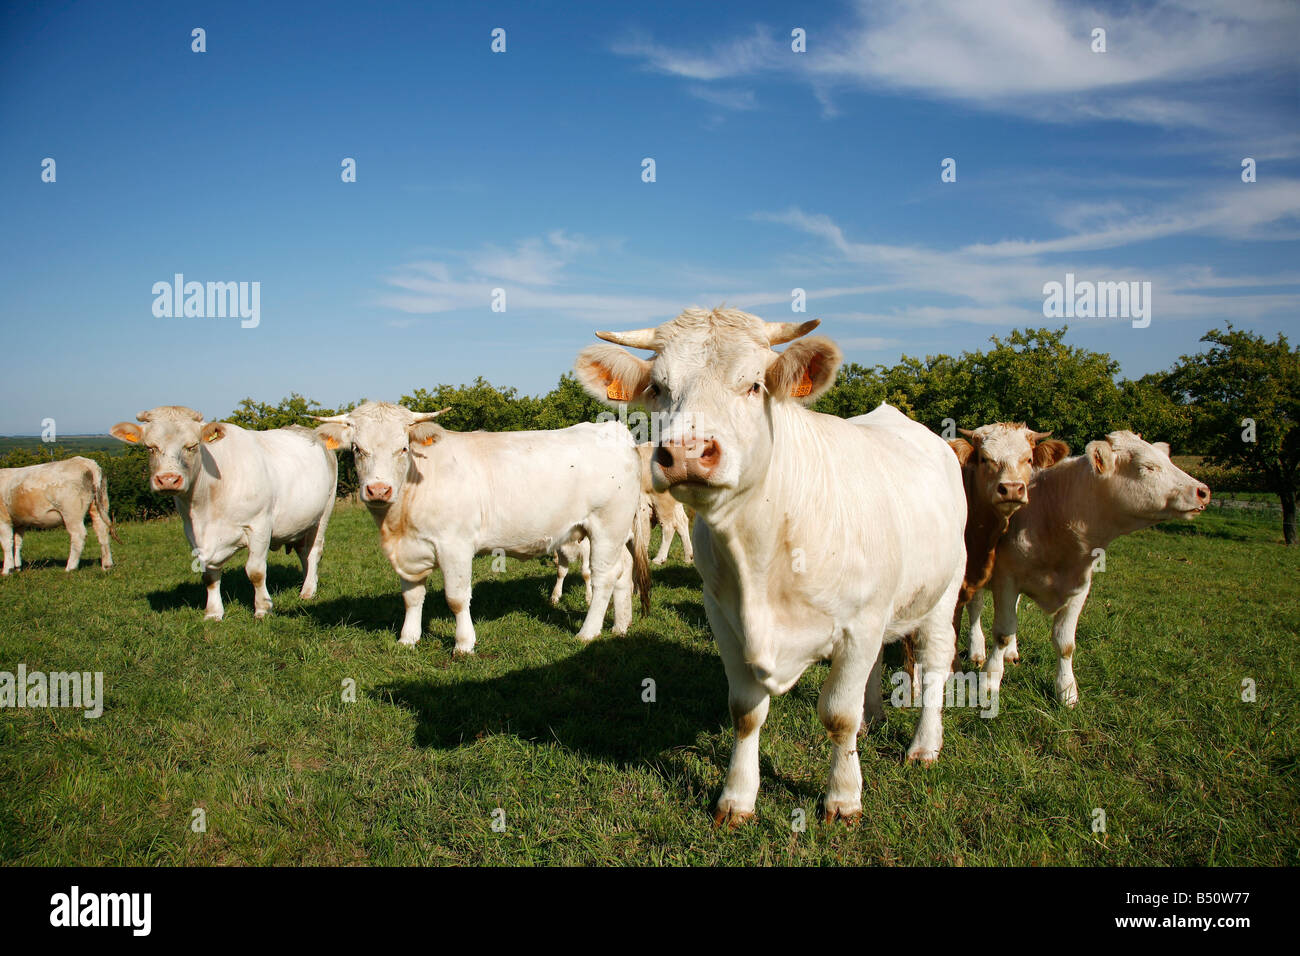 Sep 2008 - Cows in the field Alsace France Stock Photo